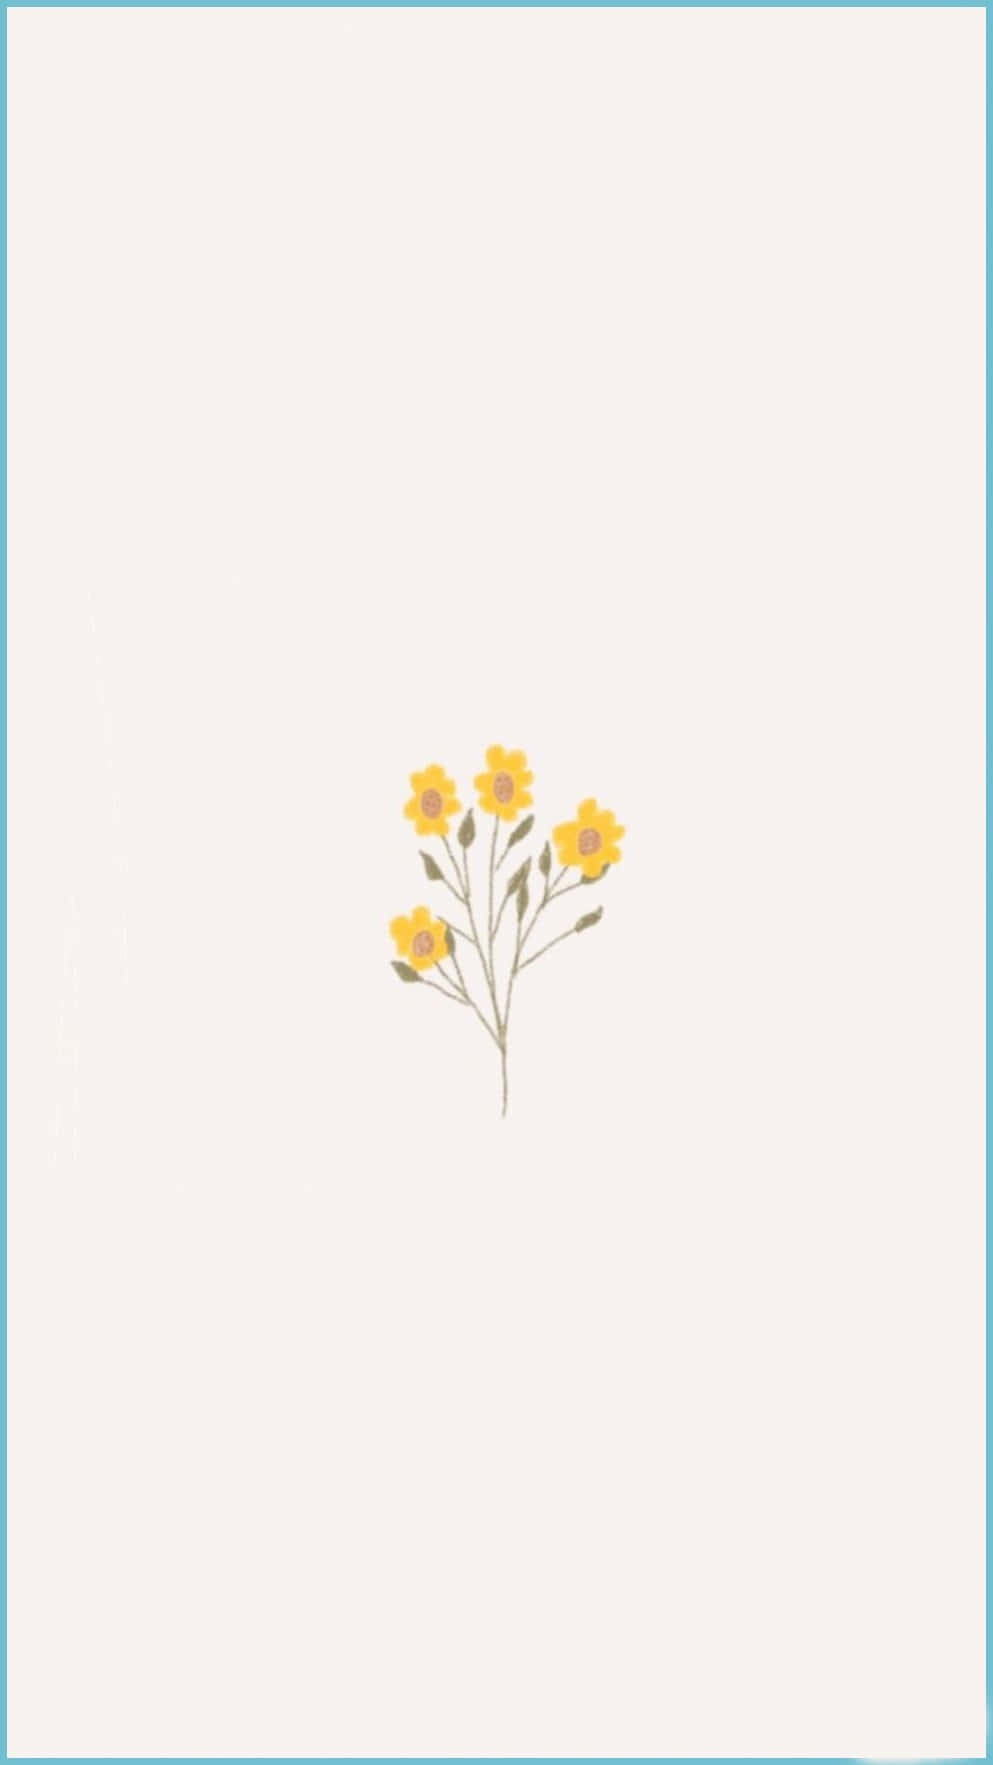 A Sweet, Pastel-hued Flower That's Sure To Bring Beauty To Any Space. Wallpaper